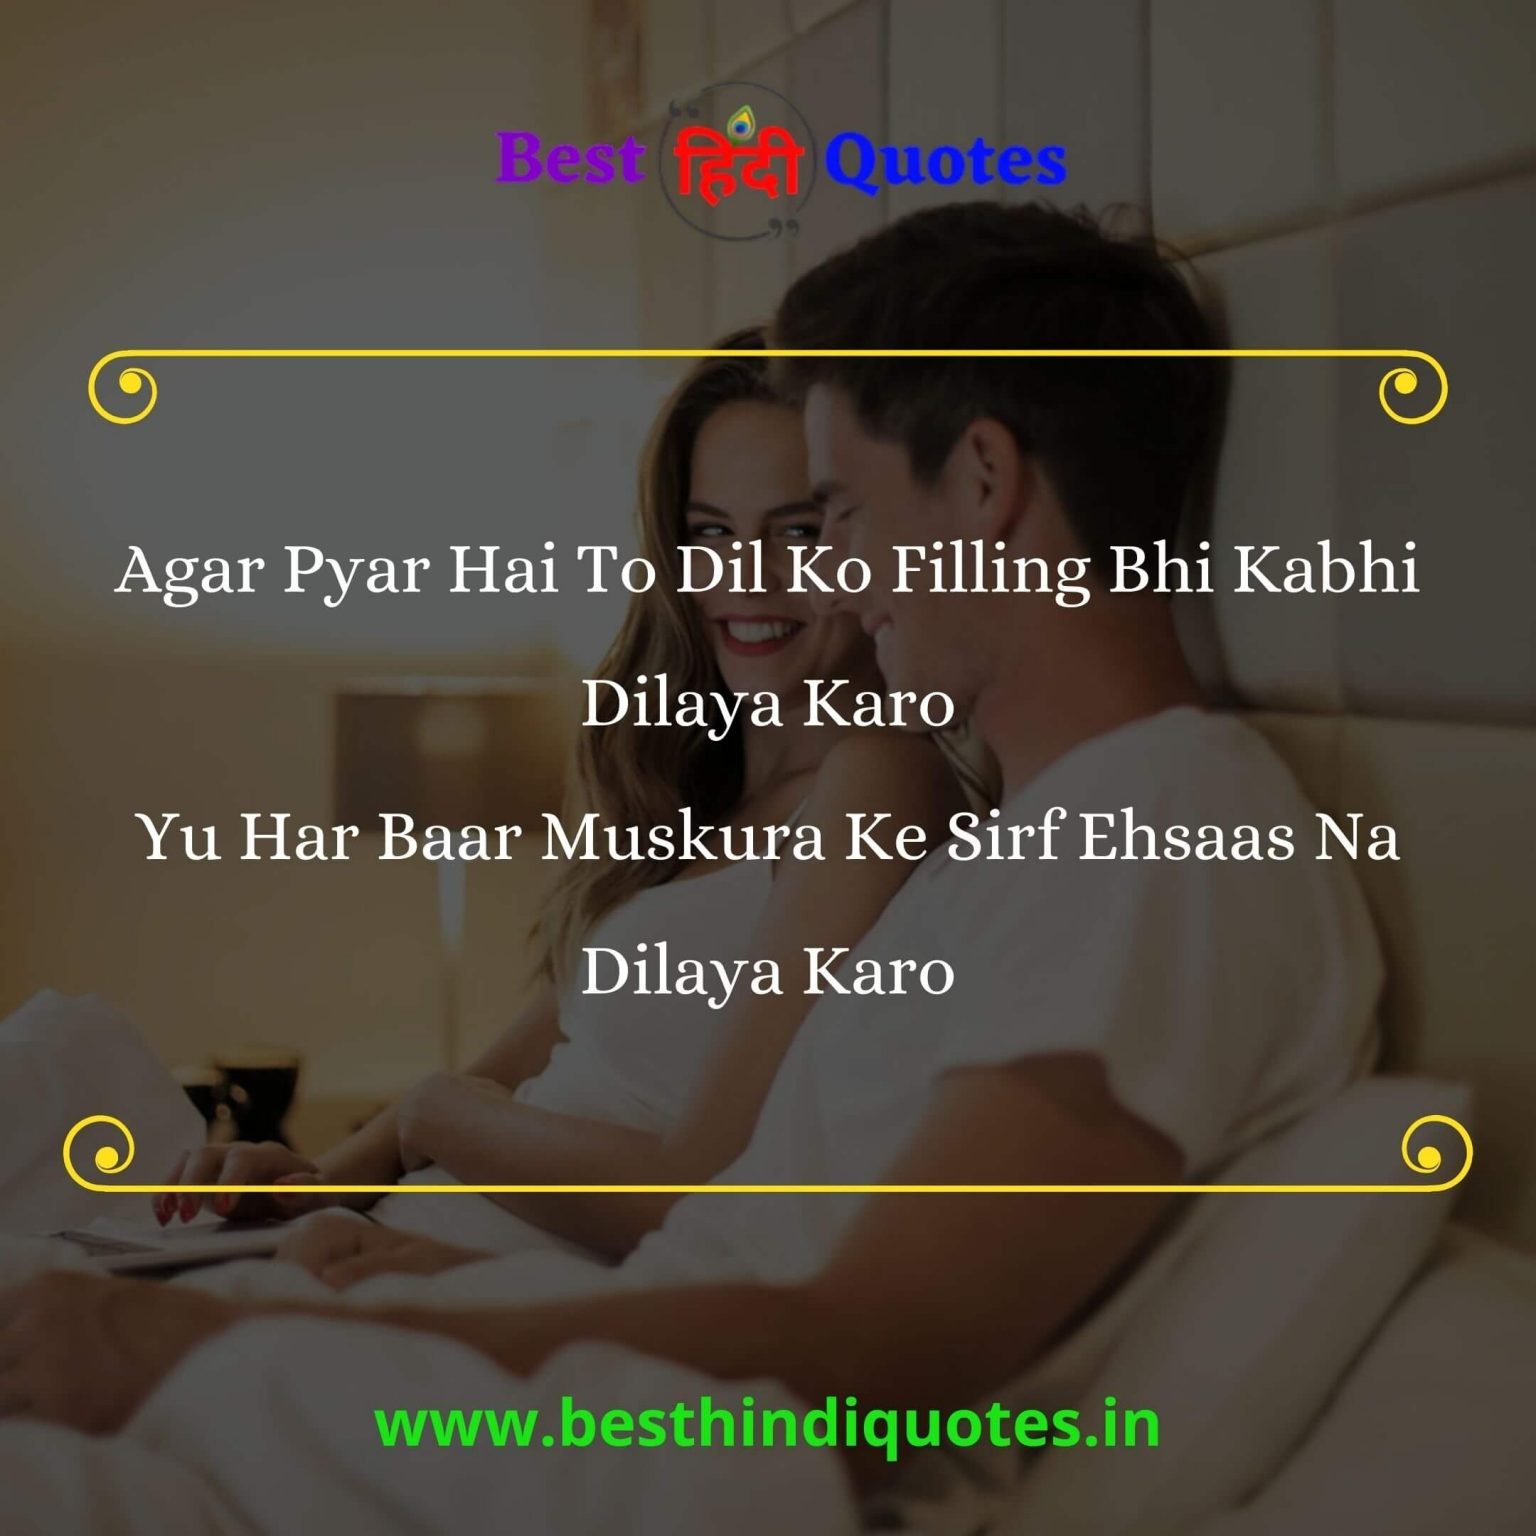 One Sided Love Quotes in Hindi - Best Hindi Quotes